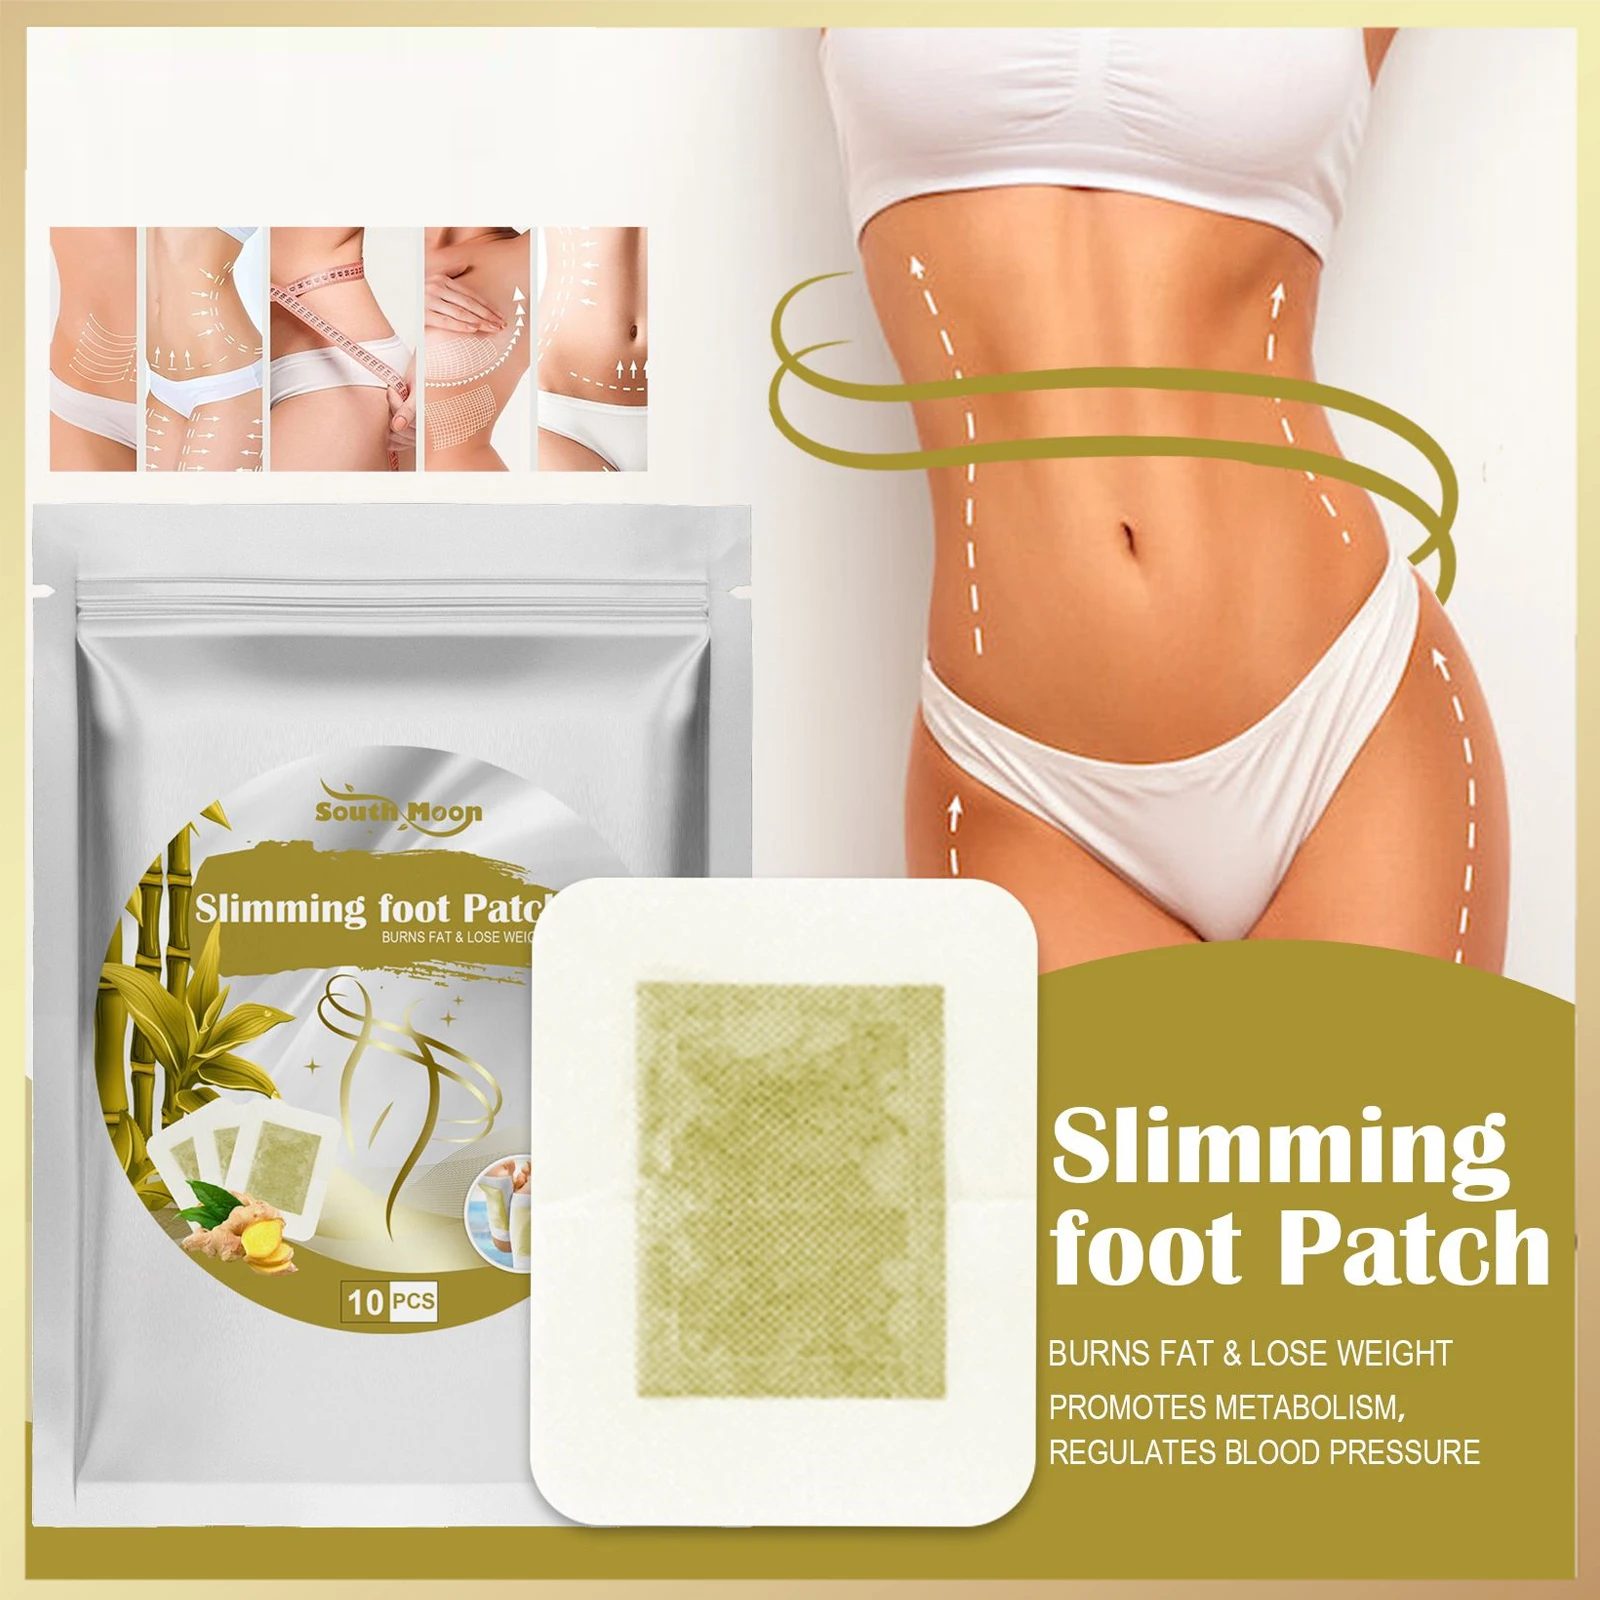 

10Pcs/Set Detox Foot Patch Ginger Firm Big Belly Improve Sleep Weight Loss Natural Herbal Toxins Deep Cleansing Foot Care Pads